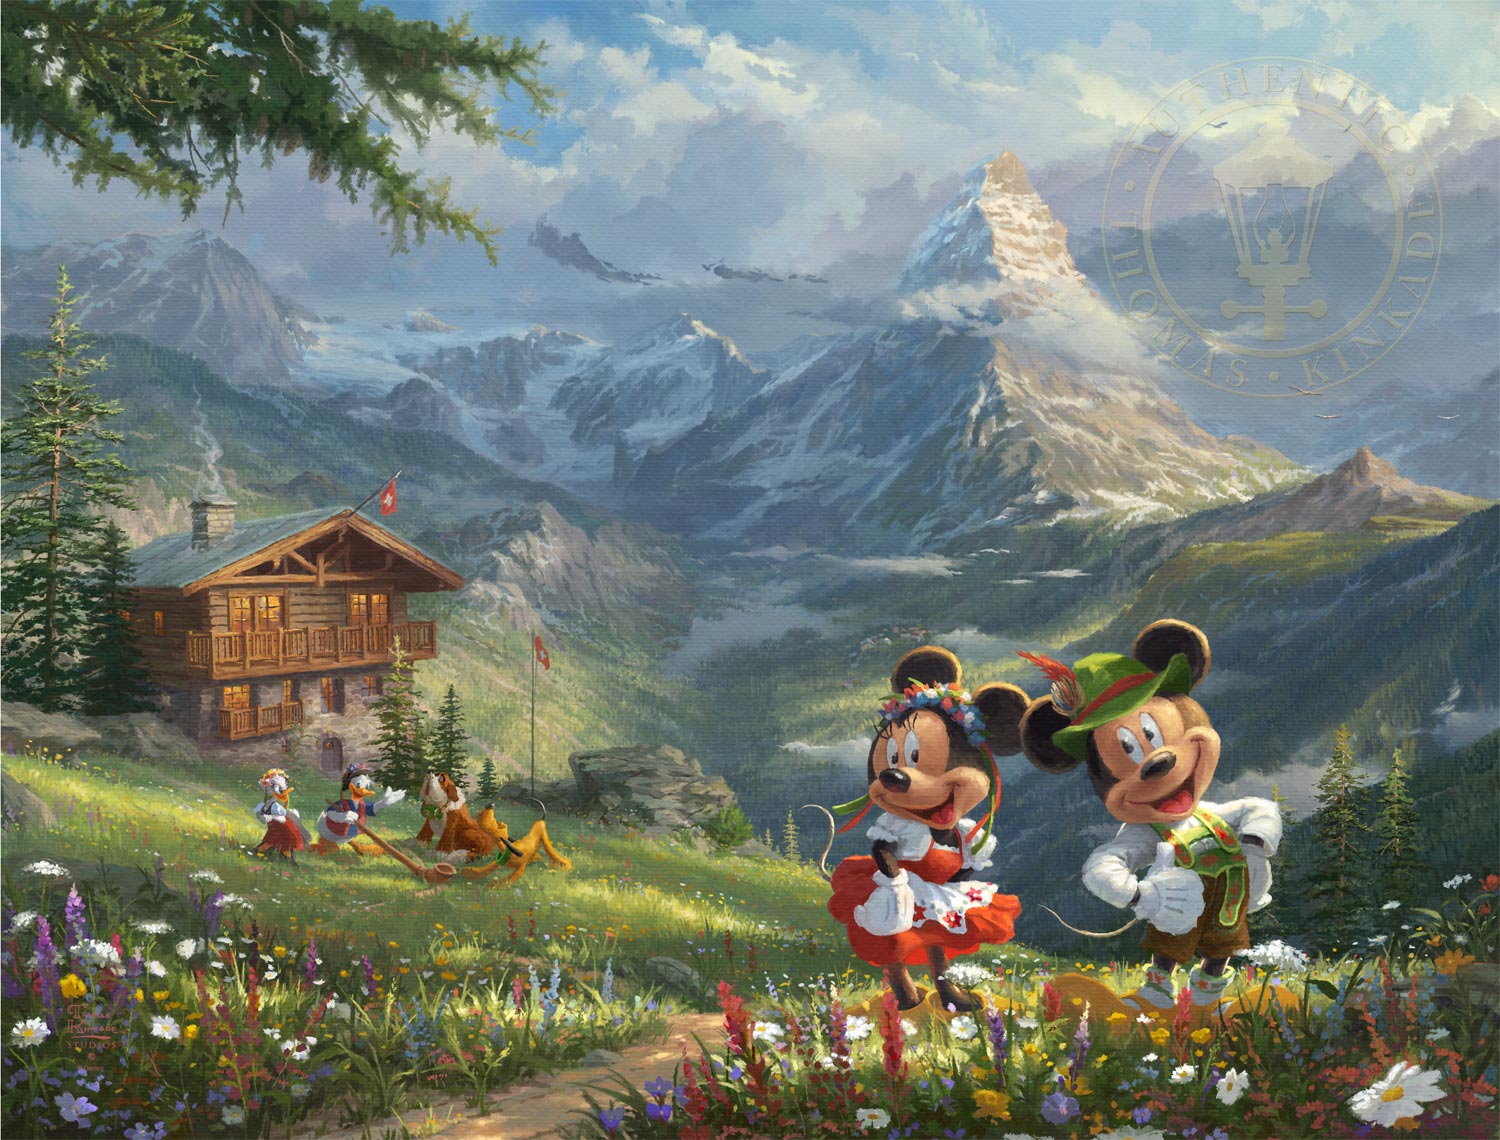 Mickey, Minnie, and Daisy dressed in the traditional Swiss attire, at a distance near the log cabin Donald, Daisy and Pluto have found a new friend. - Unframed